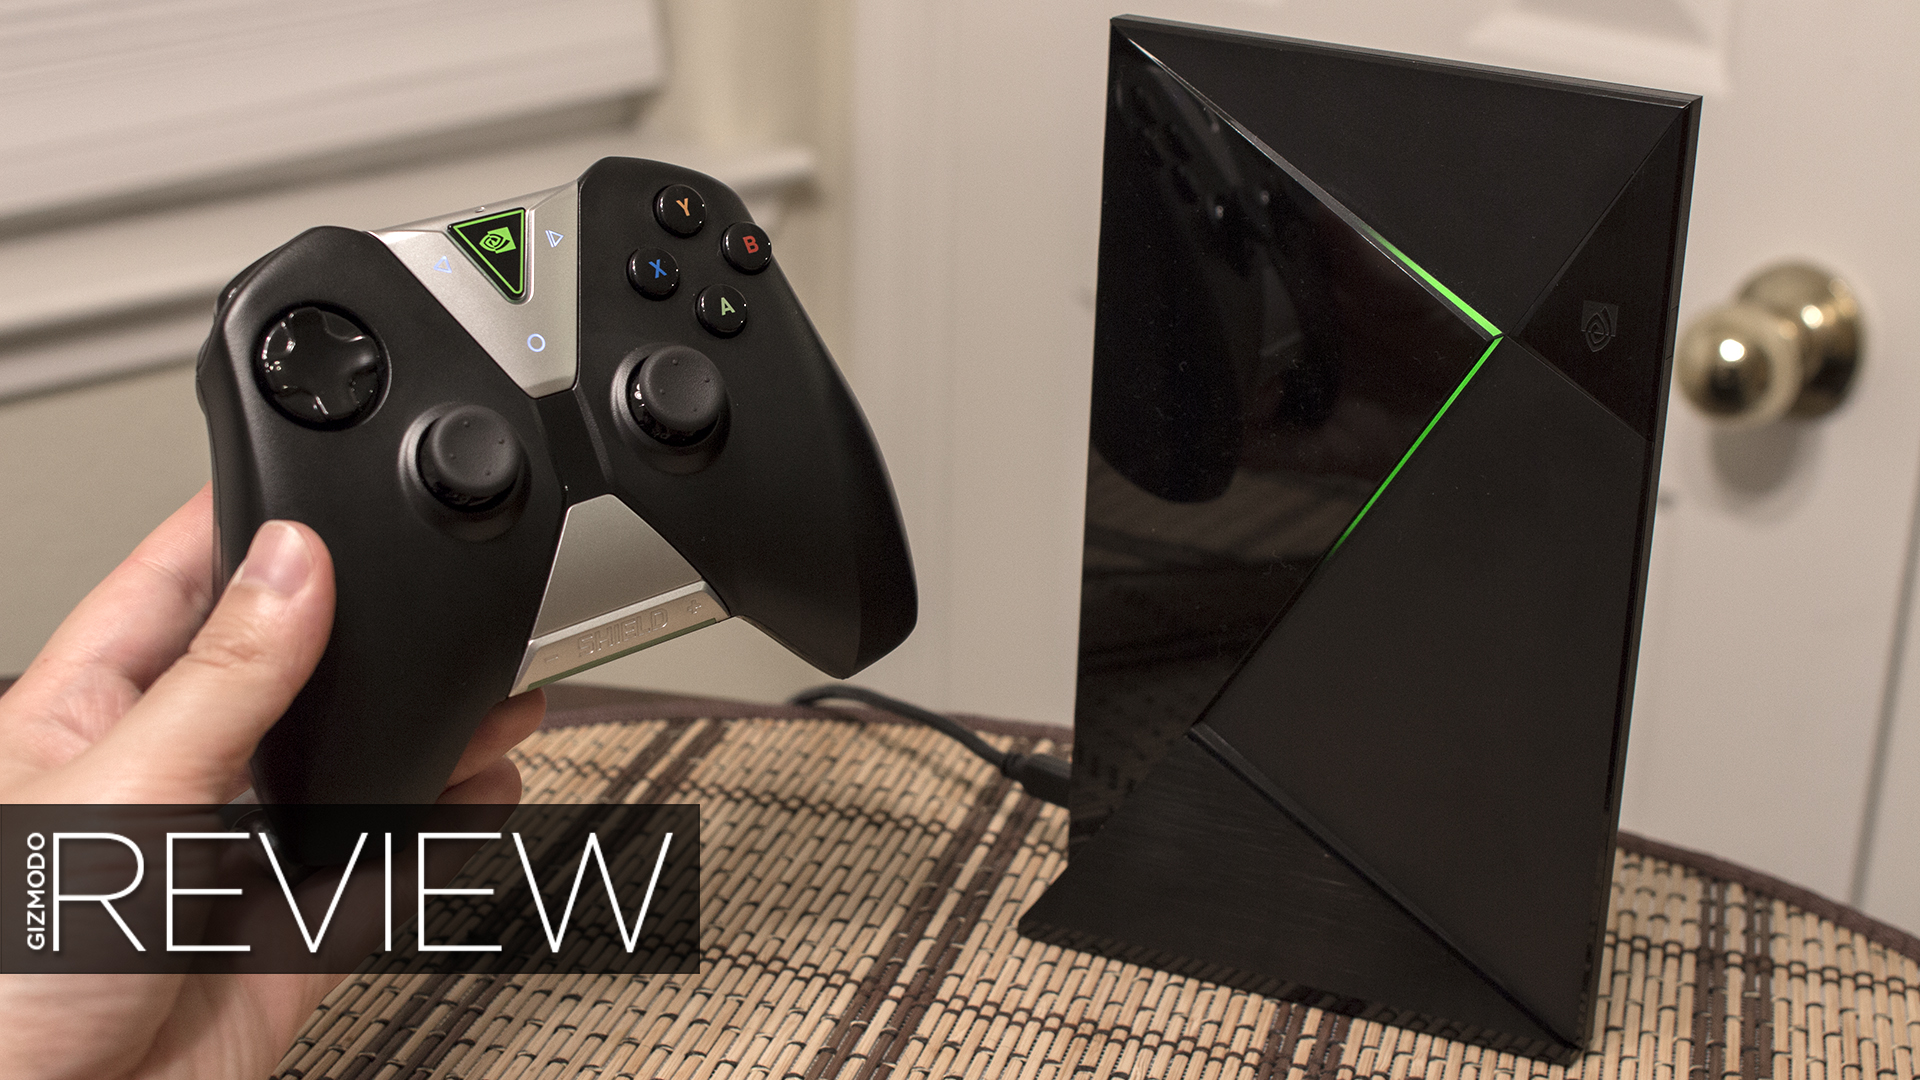 Nvidia Shield Android TV review: A gamer-friendly 4K streamer in